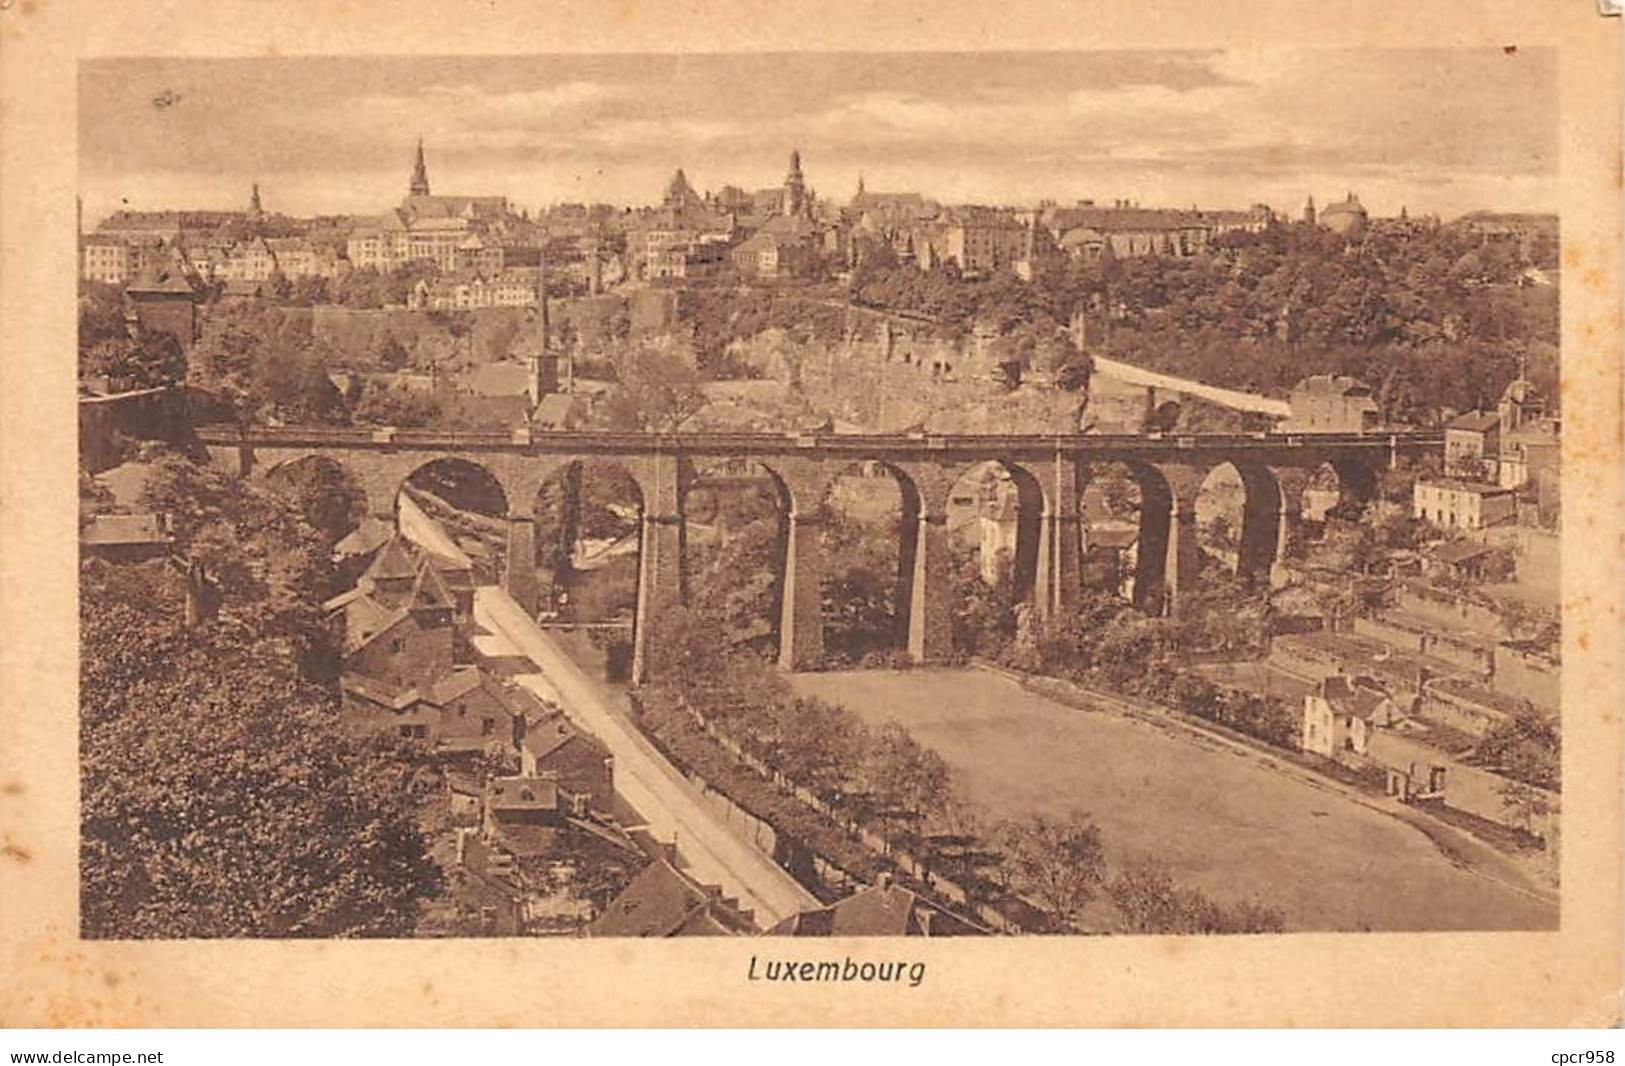 LUXEMBOURG - SAN49850 - Luxembourg - Luxemburg - Town